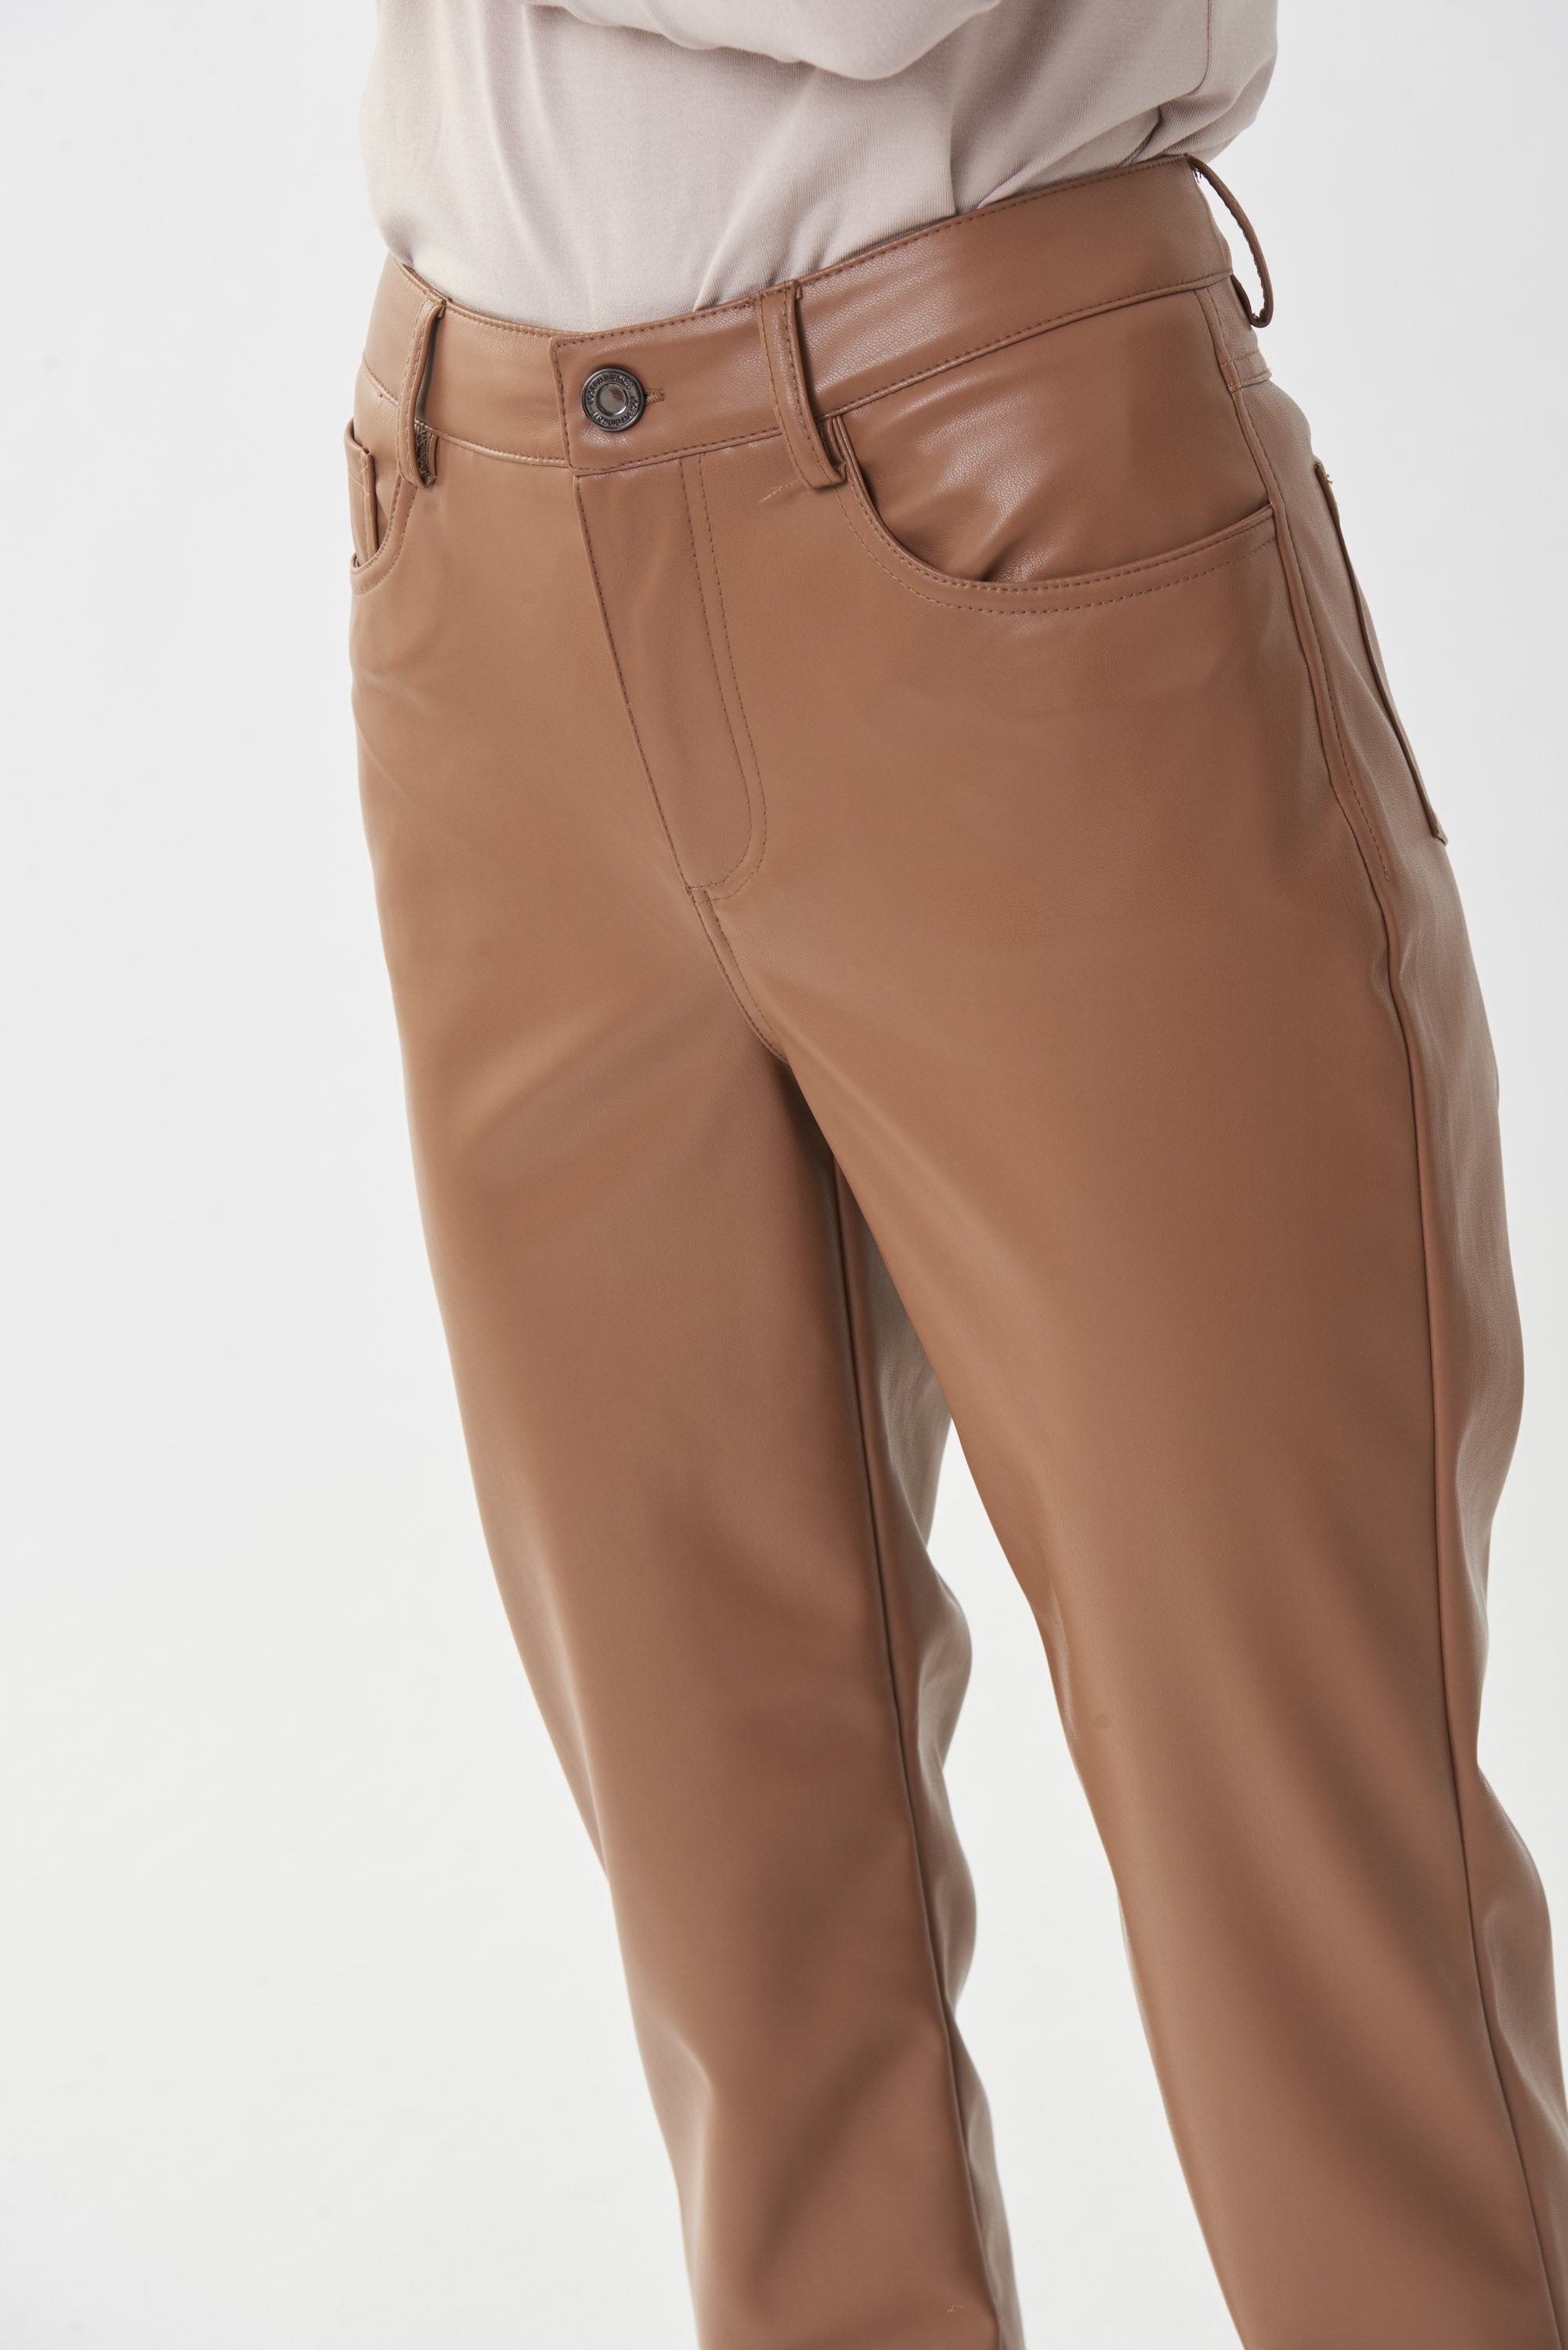 Make a stylish statement with these Pleather Pants from Joseph Ribkoff! These are cut in a denim-style design with belt loops, a button and zip fly, and fully functional front and back pockets. 